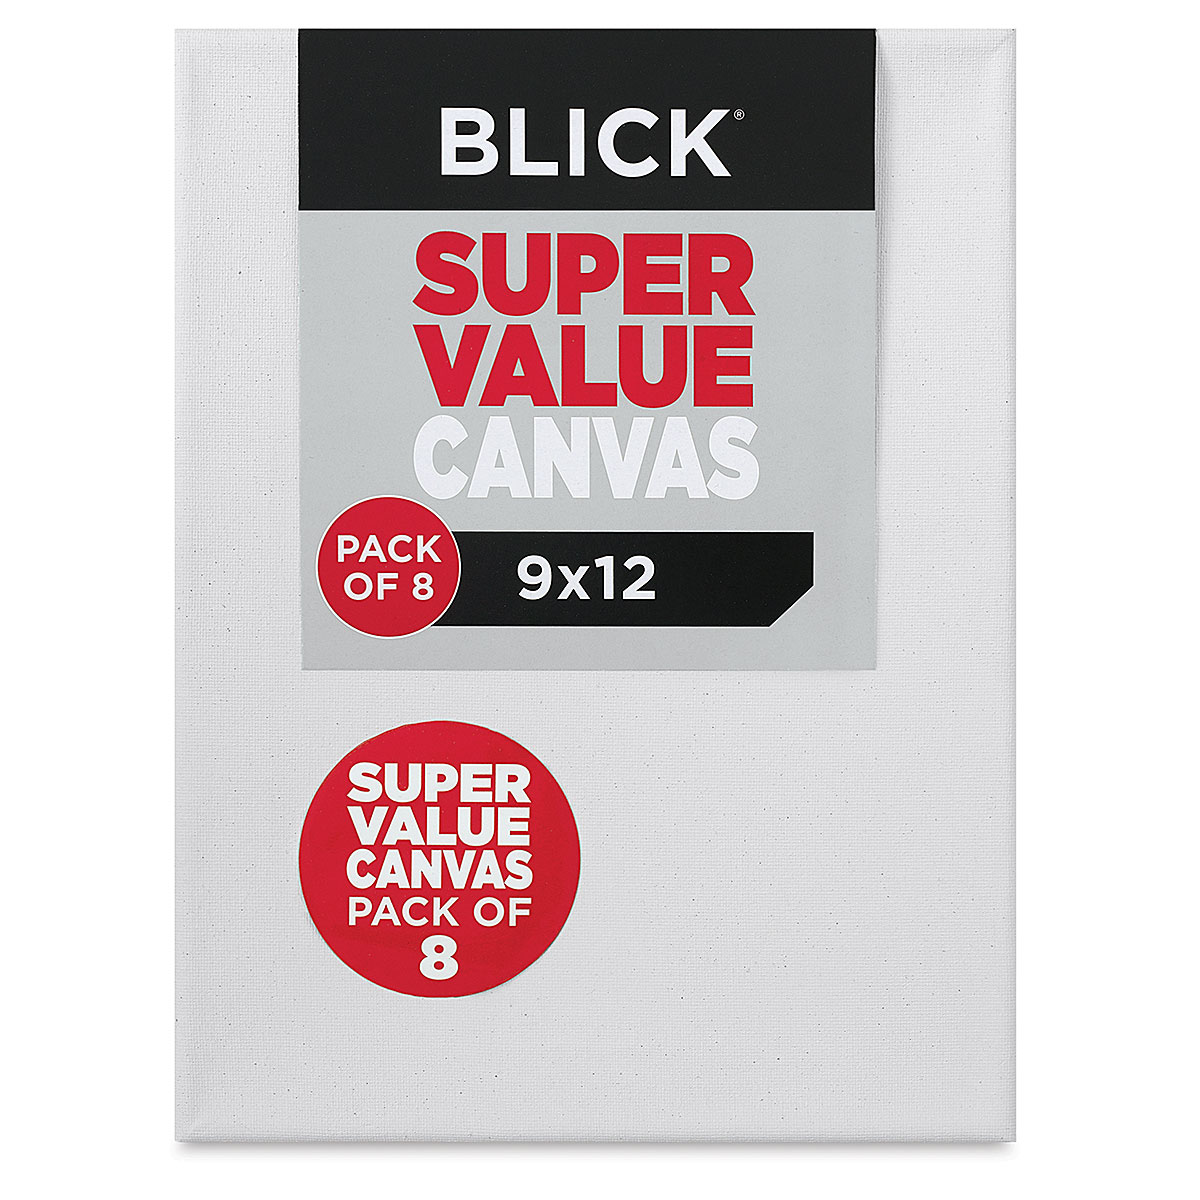 Blick Super Value Canvas Pack - 9 inch x 12 inch, Pkg of 8